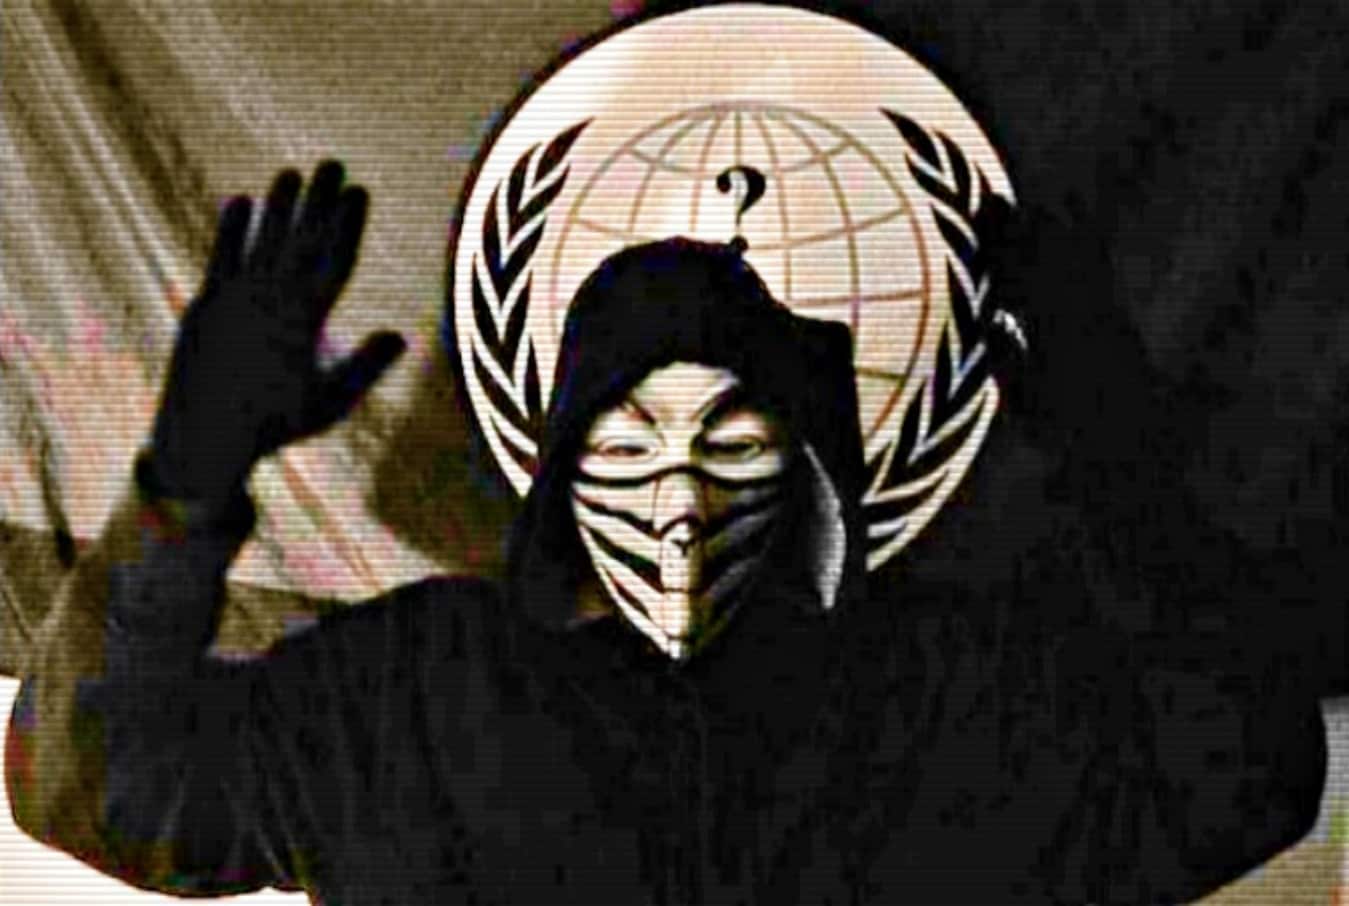 Anonymous hacked Chicago police radios with anti-cop songs